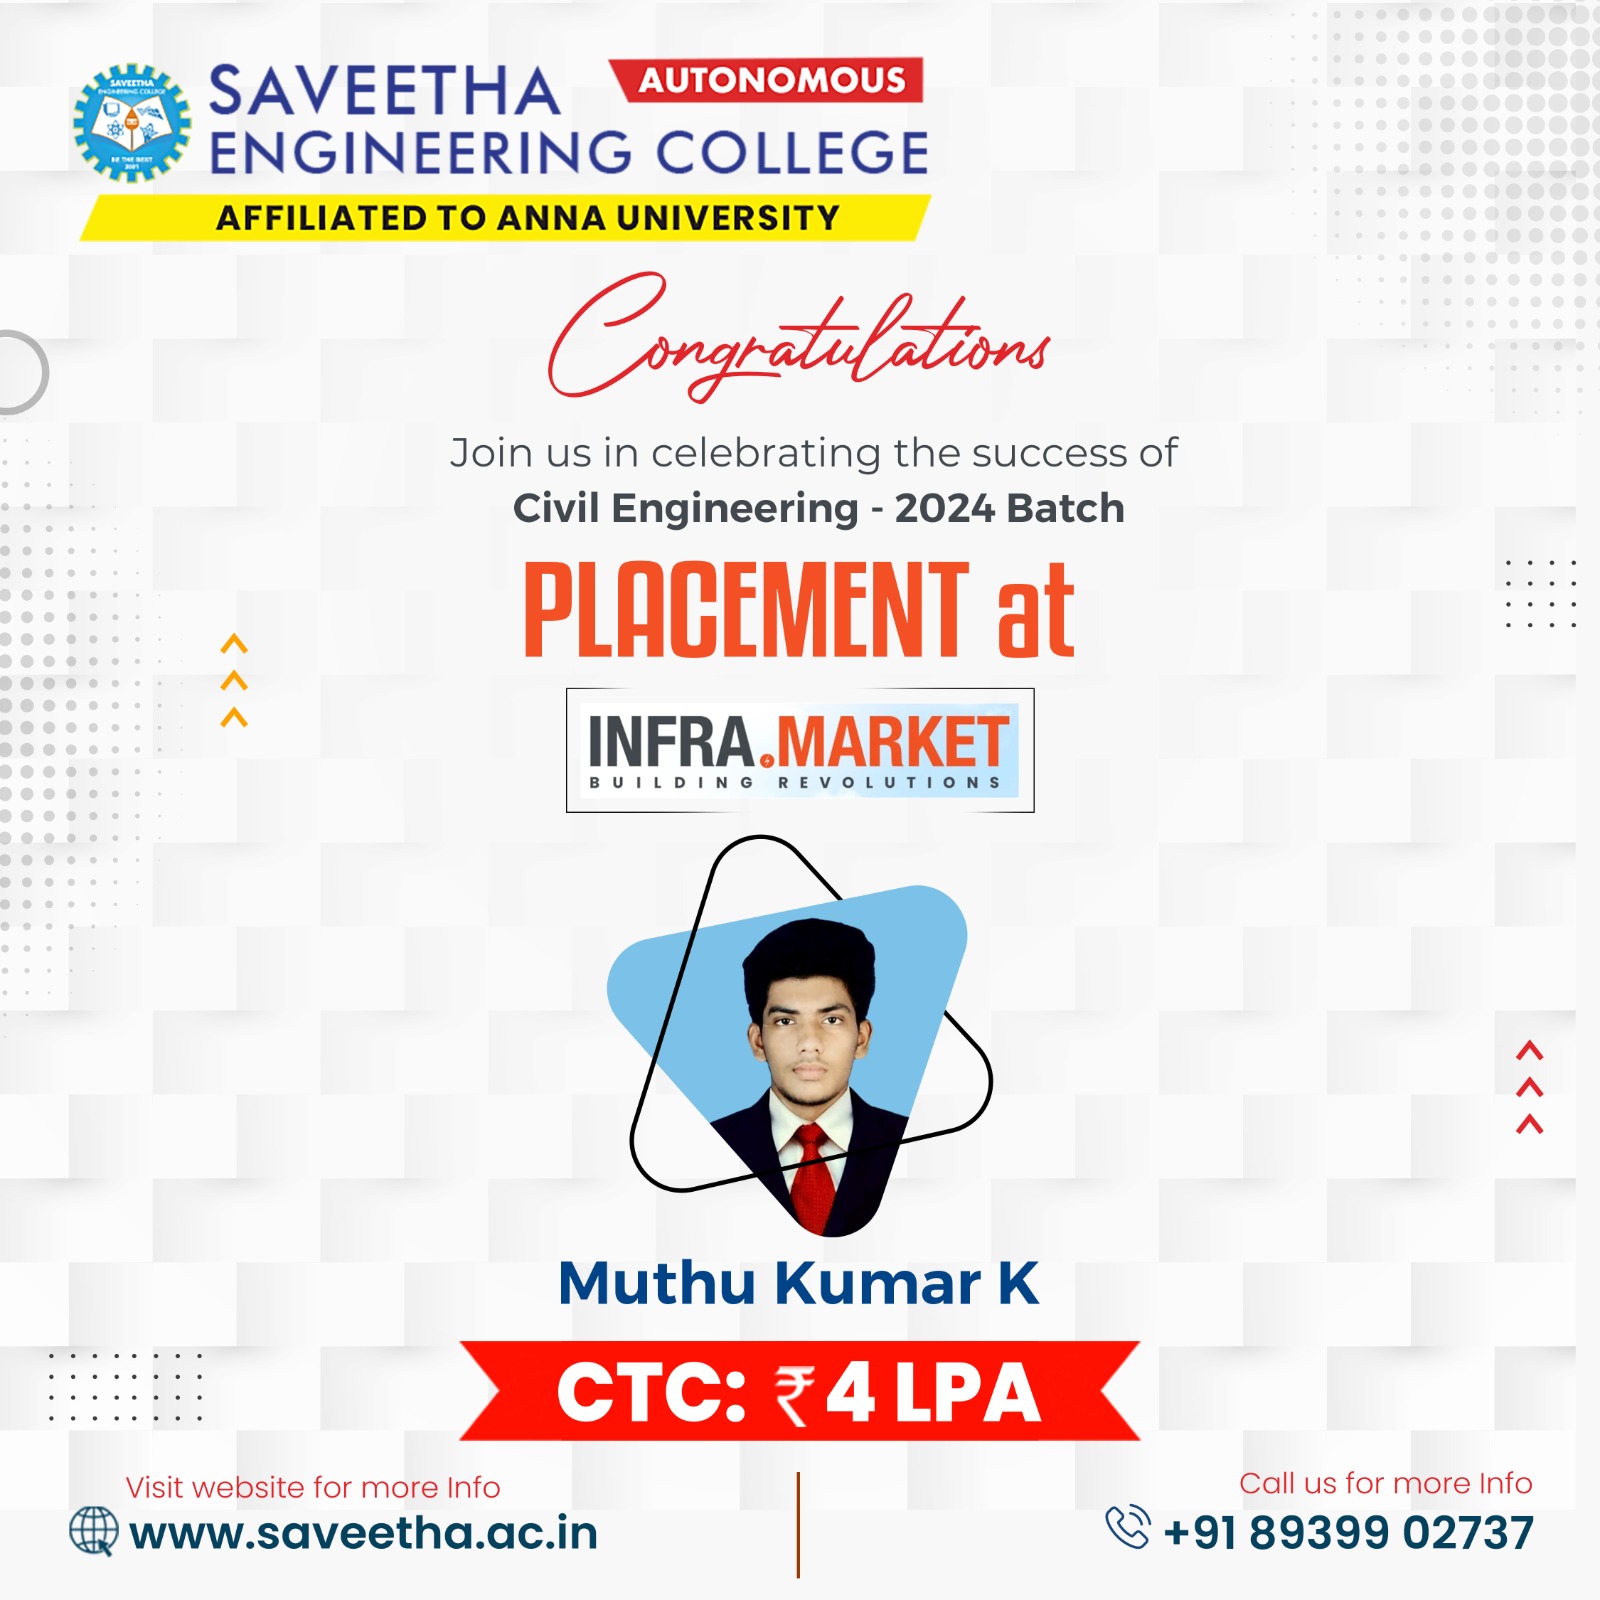 Secured Placement at Infra Market